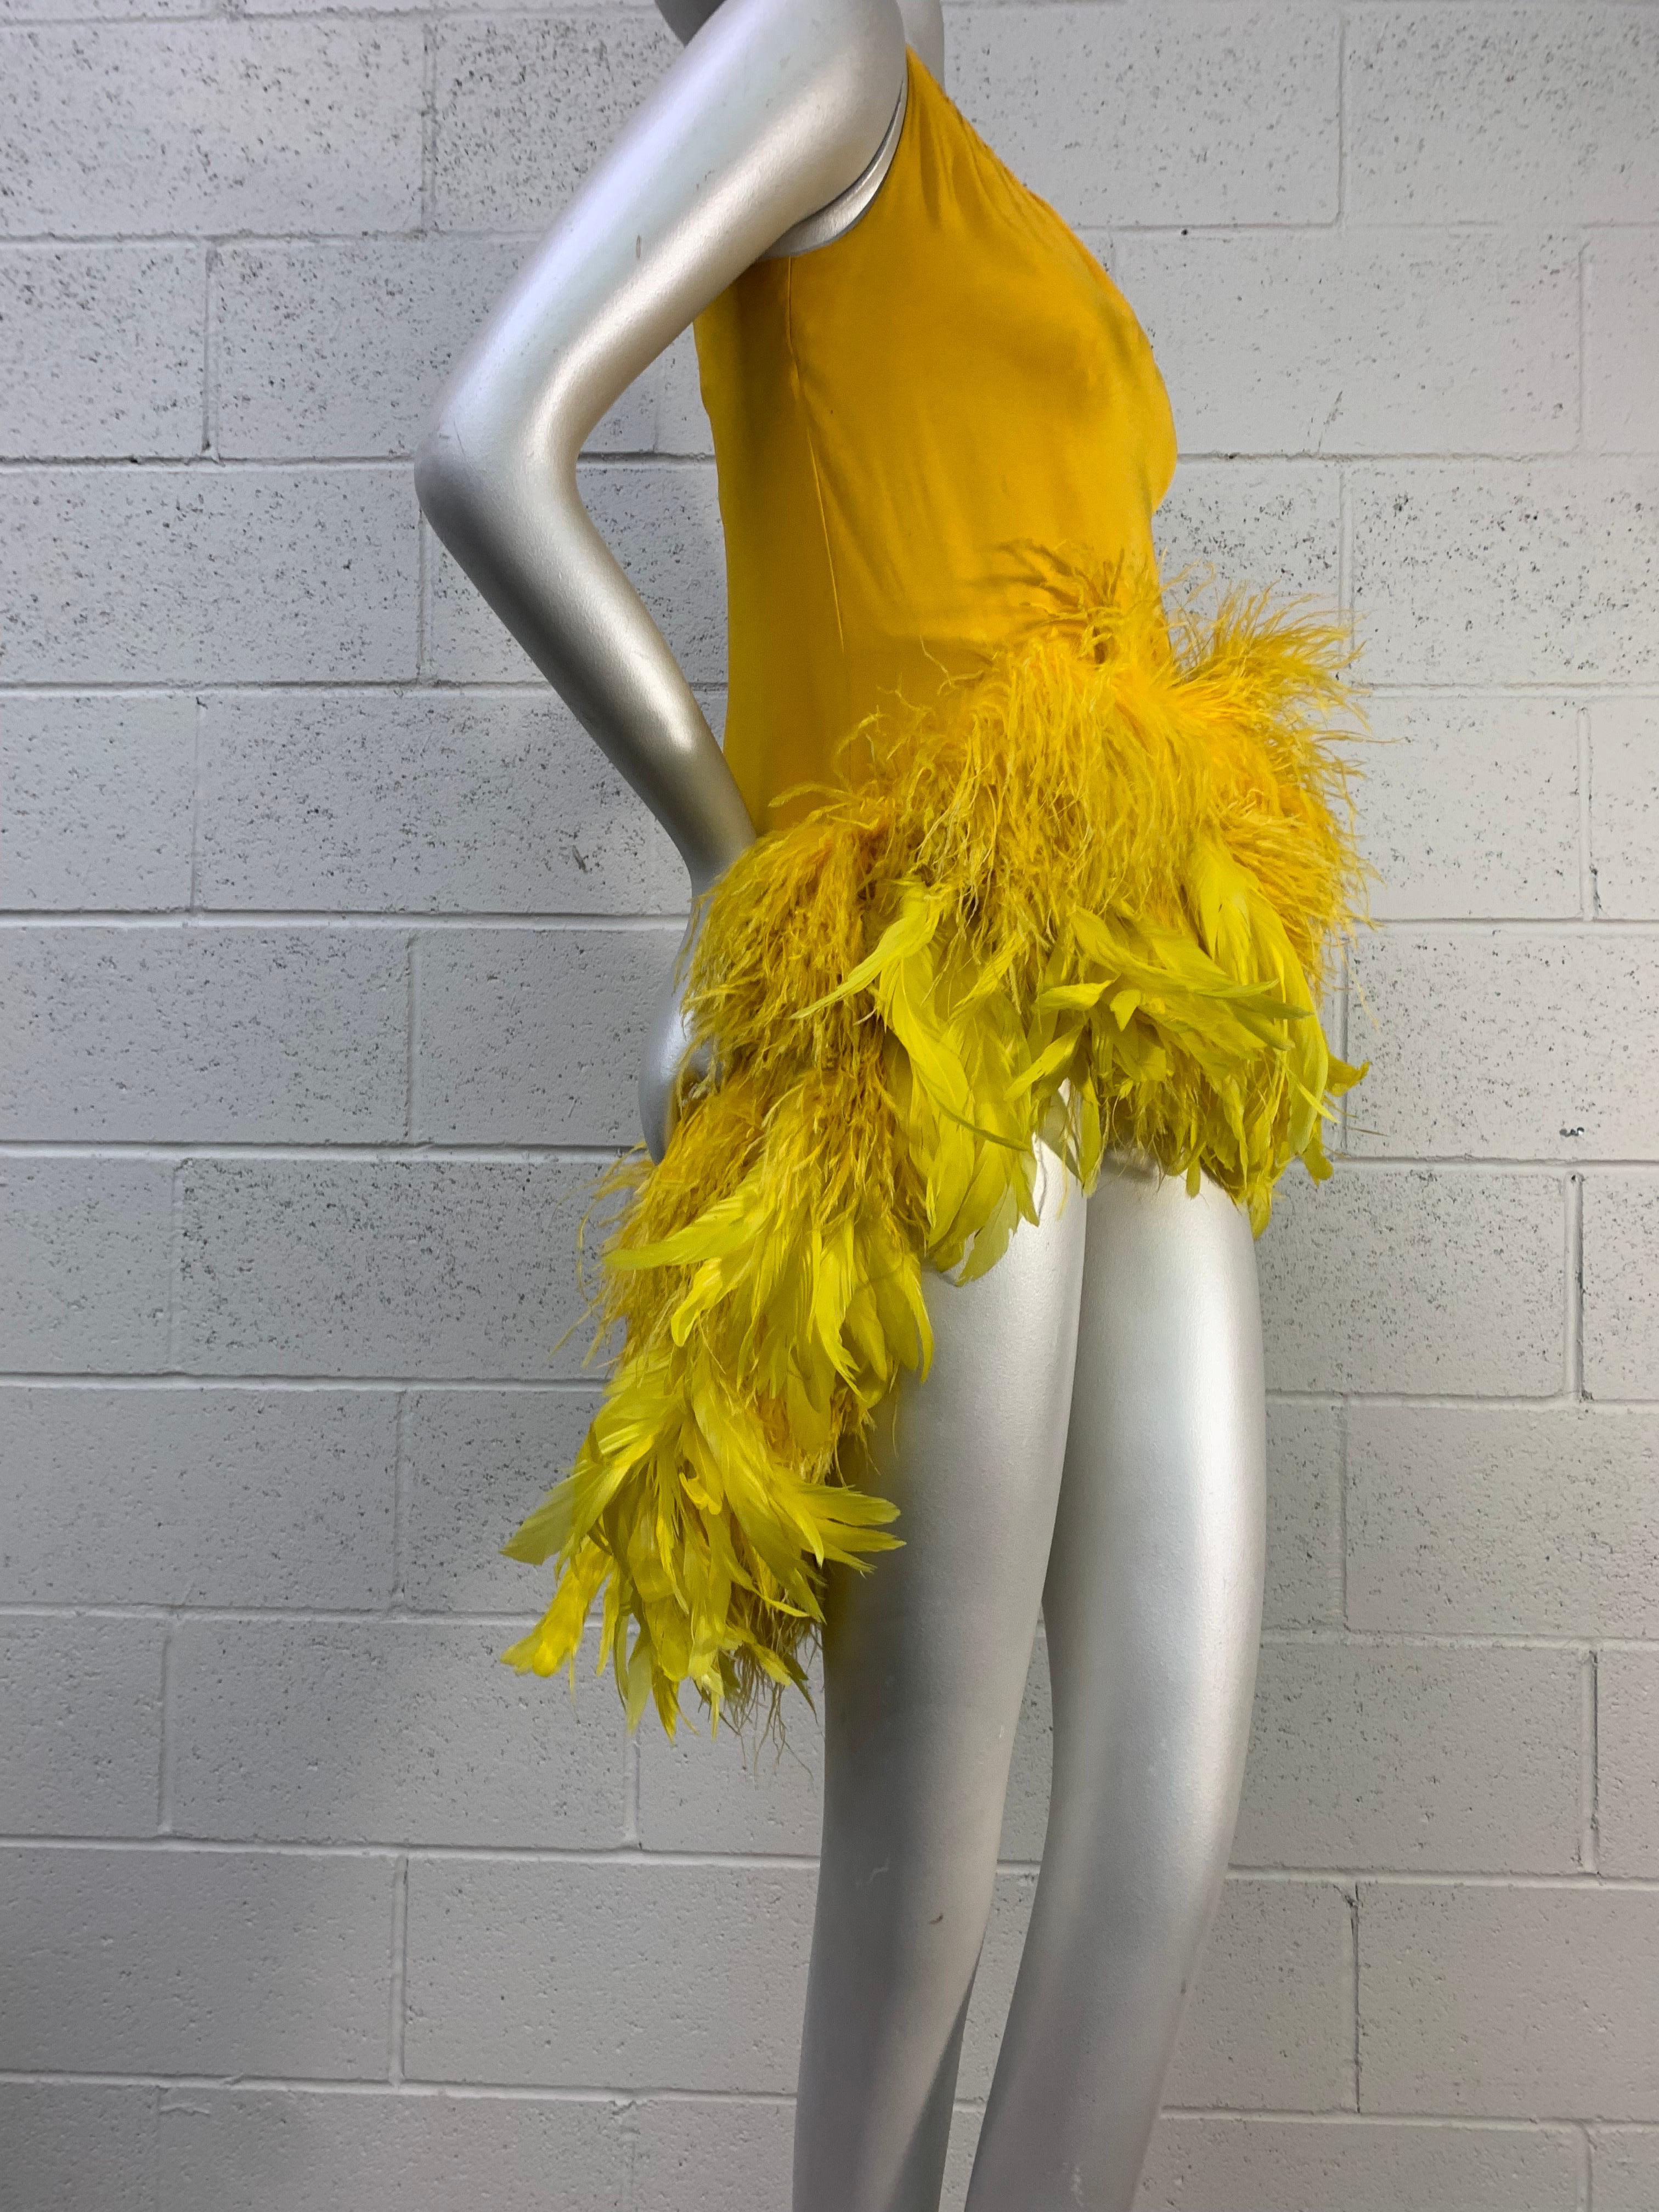 Torso Creations Canary Silk Crepe Micro-Mini Dress w Extravagant Ostrich Trim:  Tank cut neck, fully lined and zippered back. Would be perfect for any costume ball!  US size 4-6. 